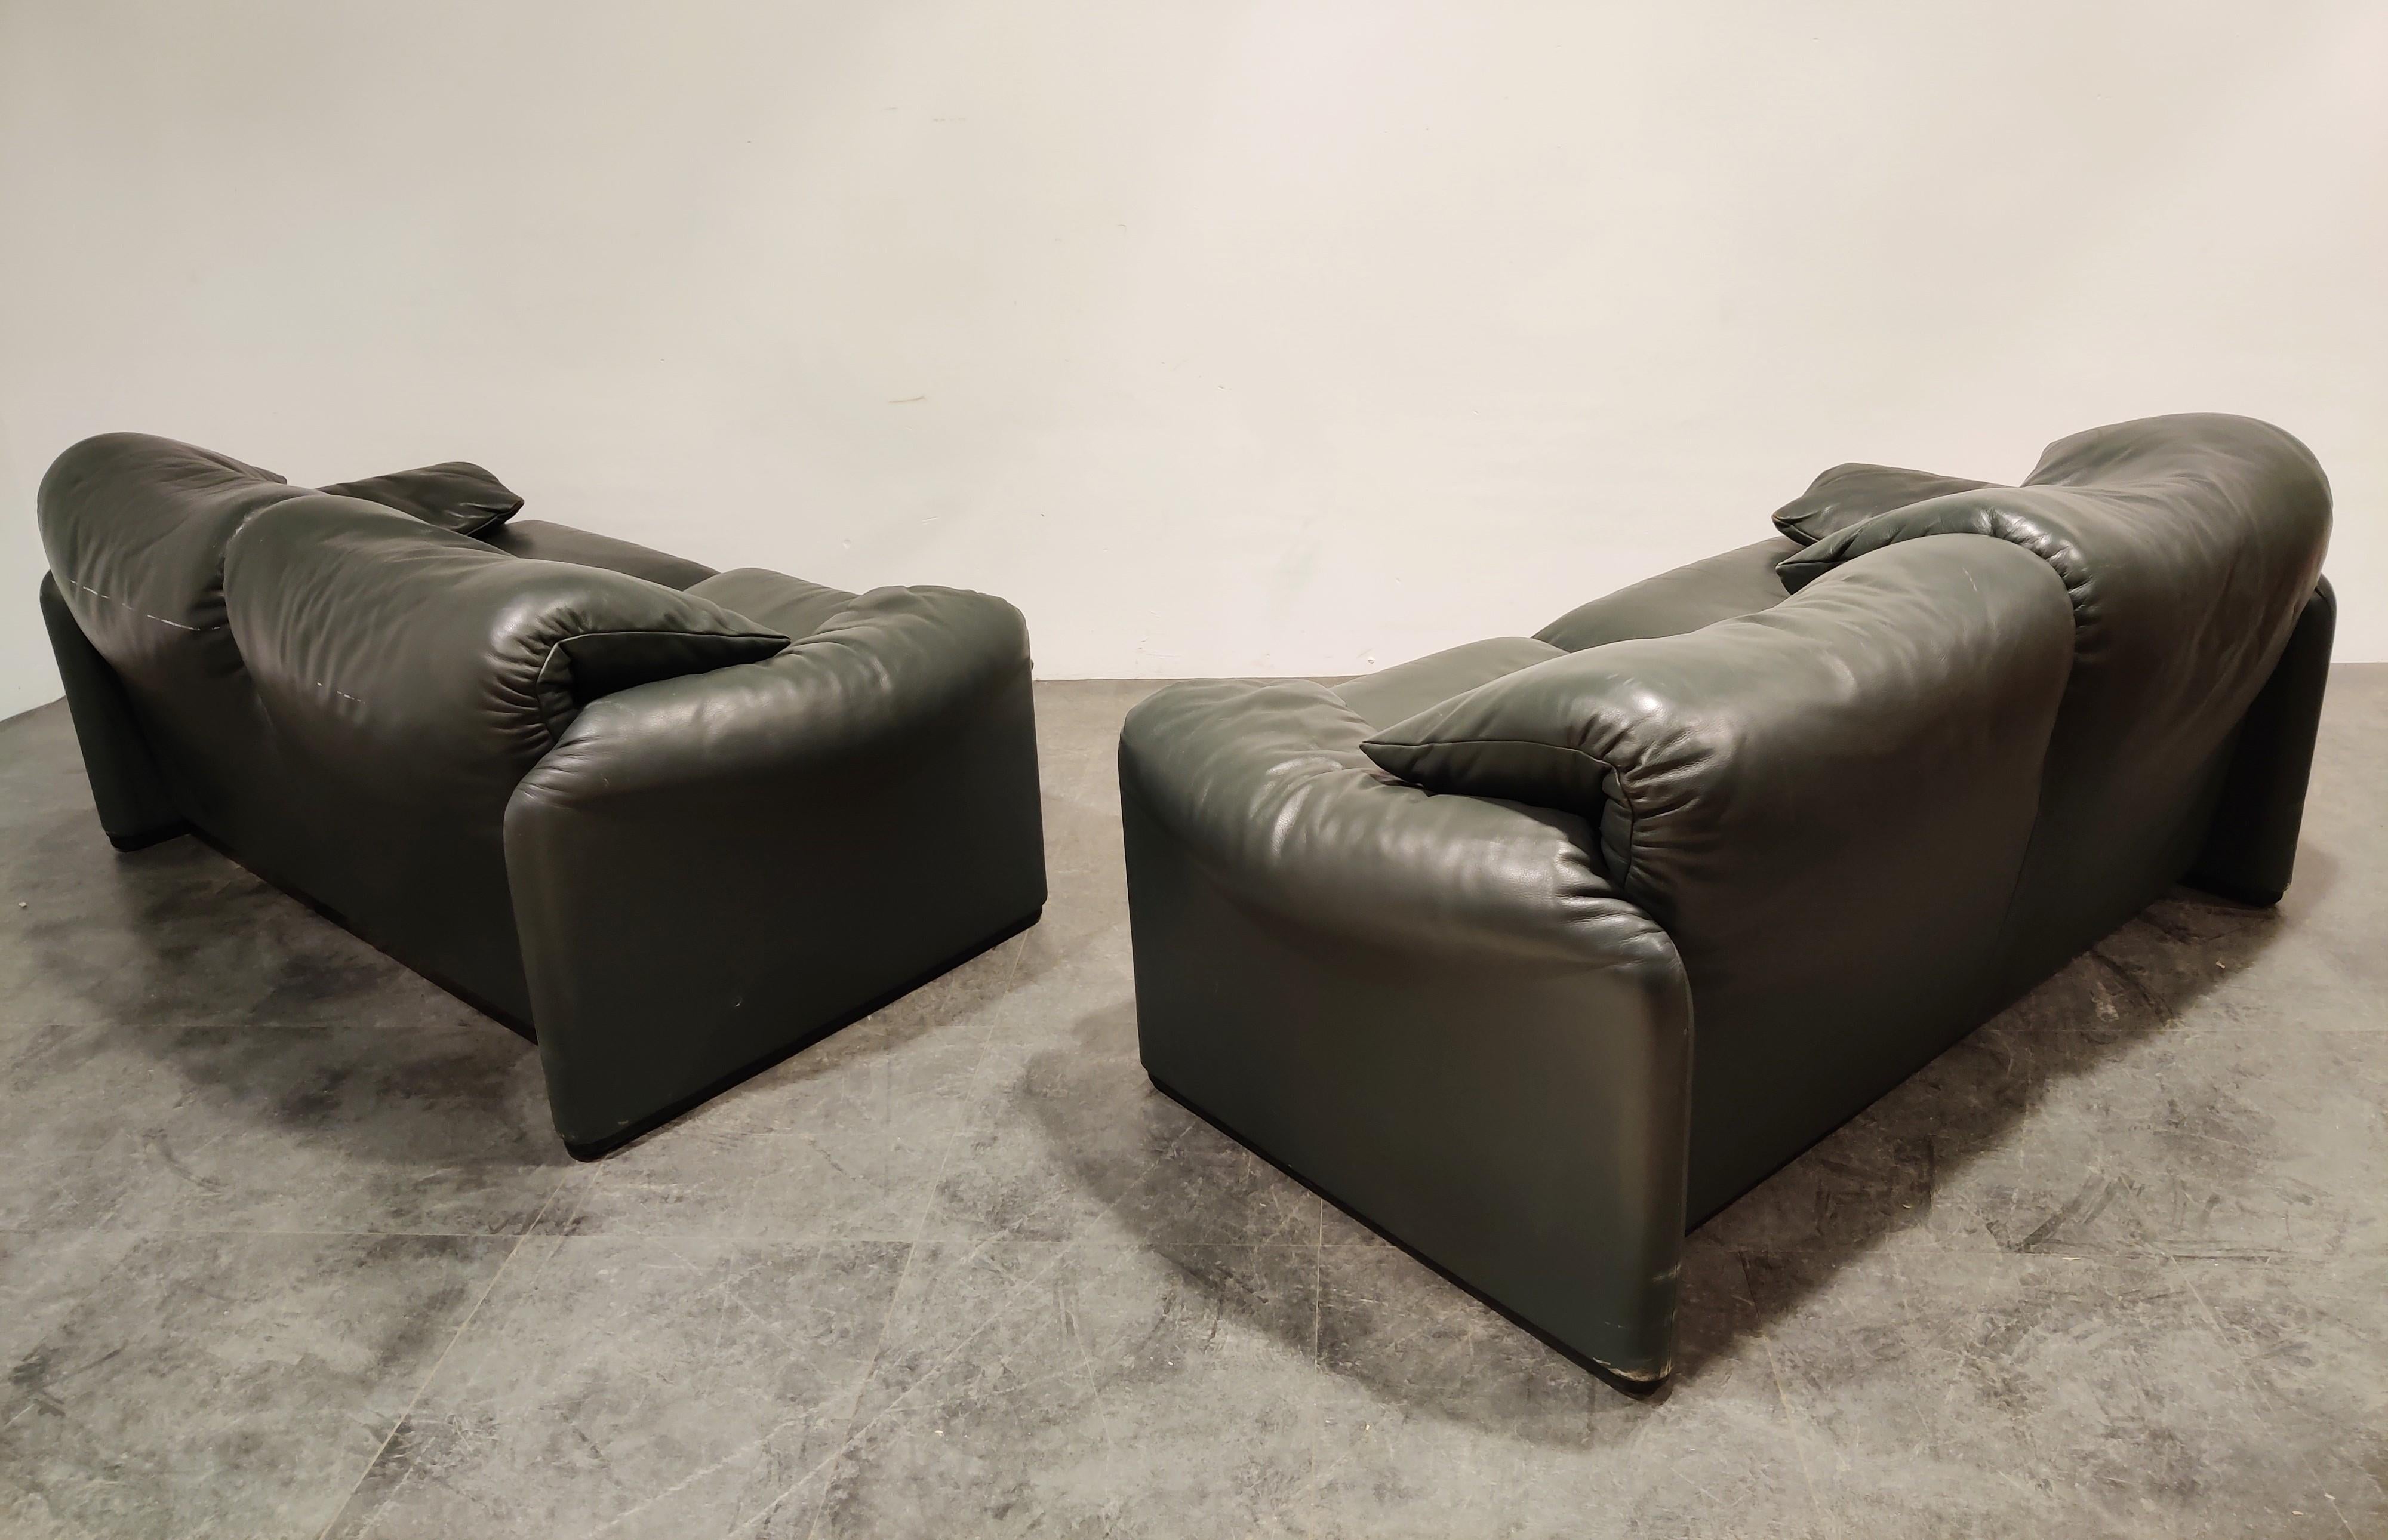 Vintage rare dark green leather maralunga sofa set designed by Vico Magistretti for Cassina.

Award winning design piece from 1973 with adjustable backrests.

The set consists of a two 2 seater sofas

Good condition with age related wear. Some